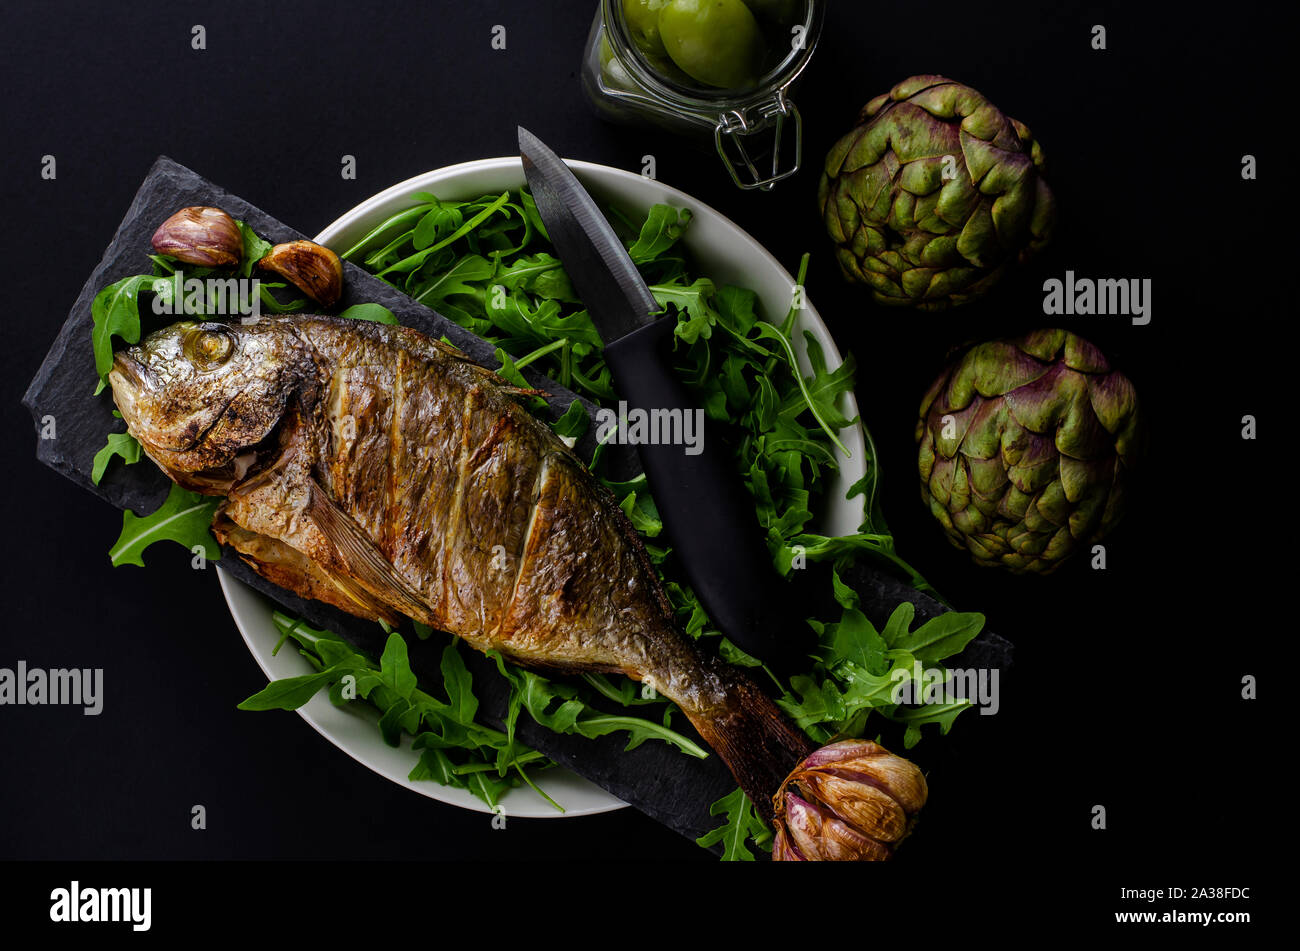 Top view of baked sea bream on a bowl with arugula, artichokes and knife on black background. Mediterranean food concept. Stock Photo